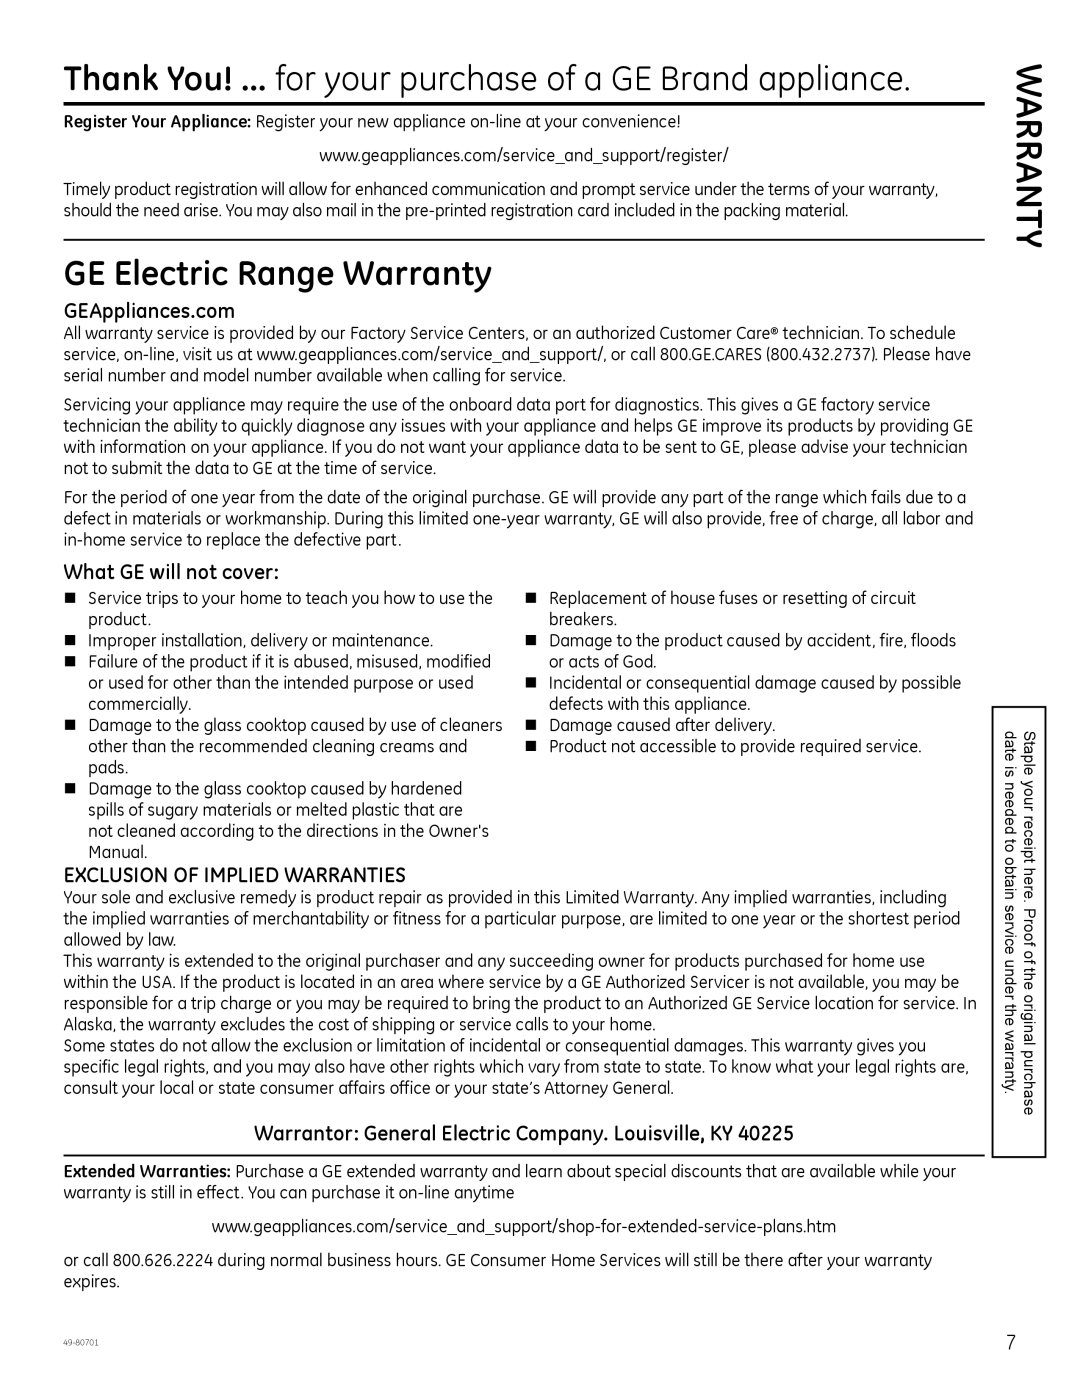 GE JB870, JB850 Thank You! ... for your purchase of a GE Brand appliance, GE Electric Range Warranty, GEAppliances.com 